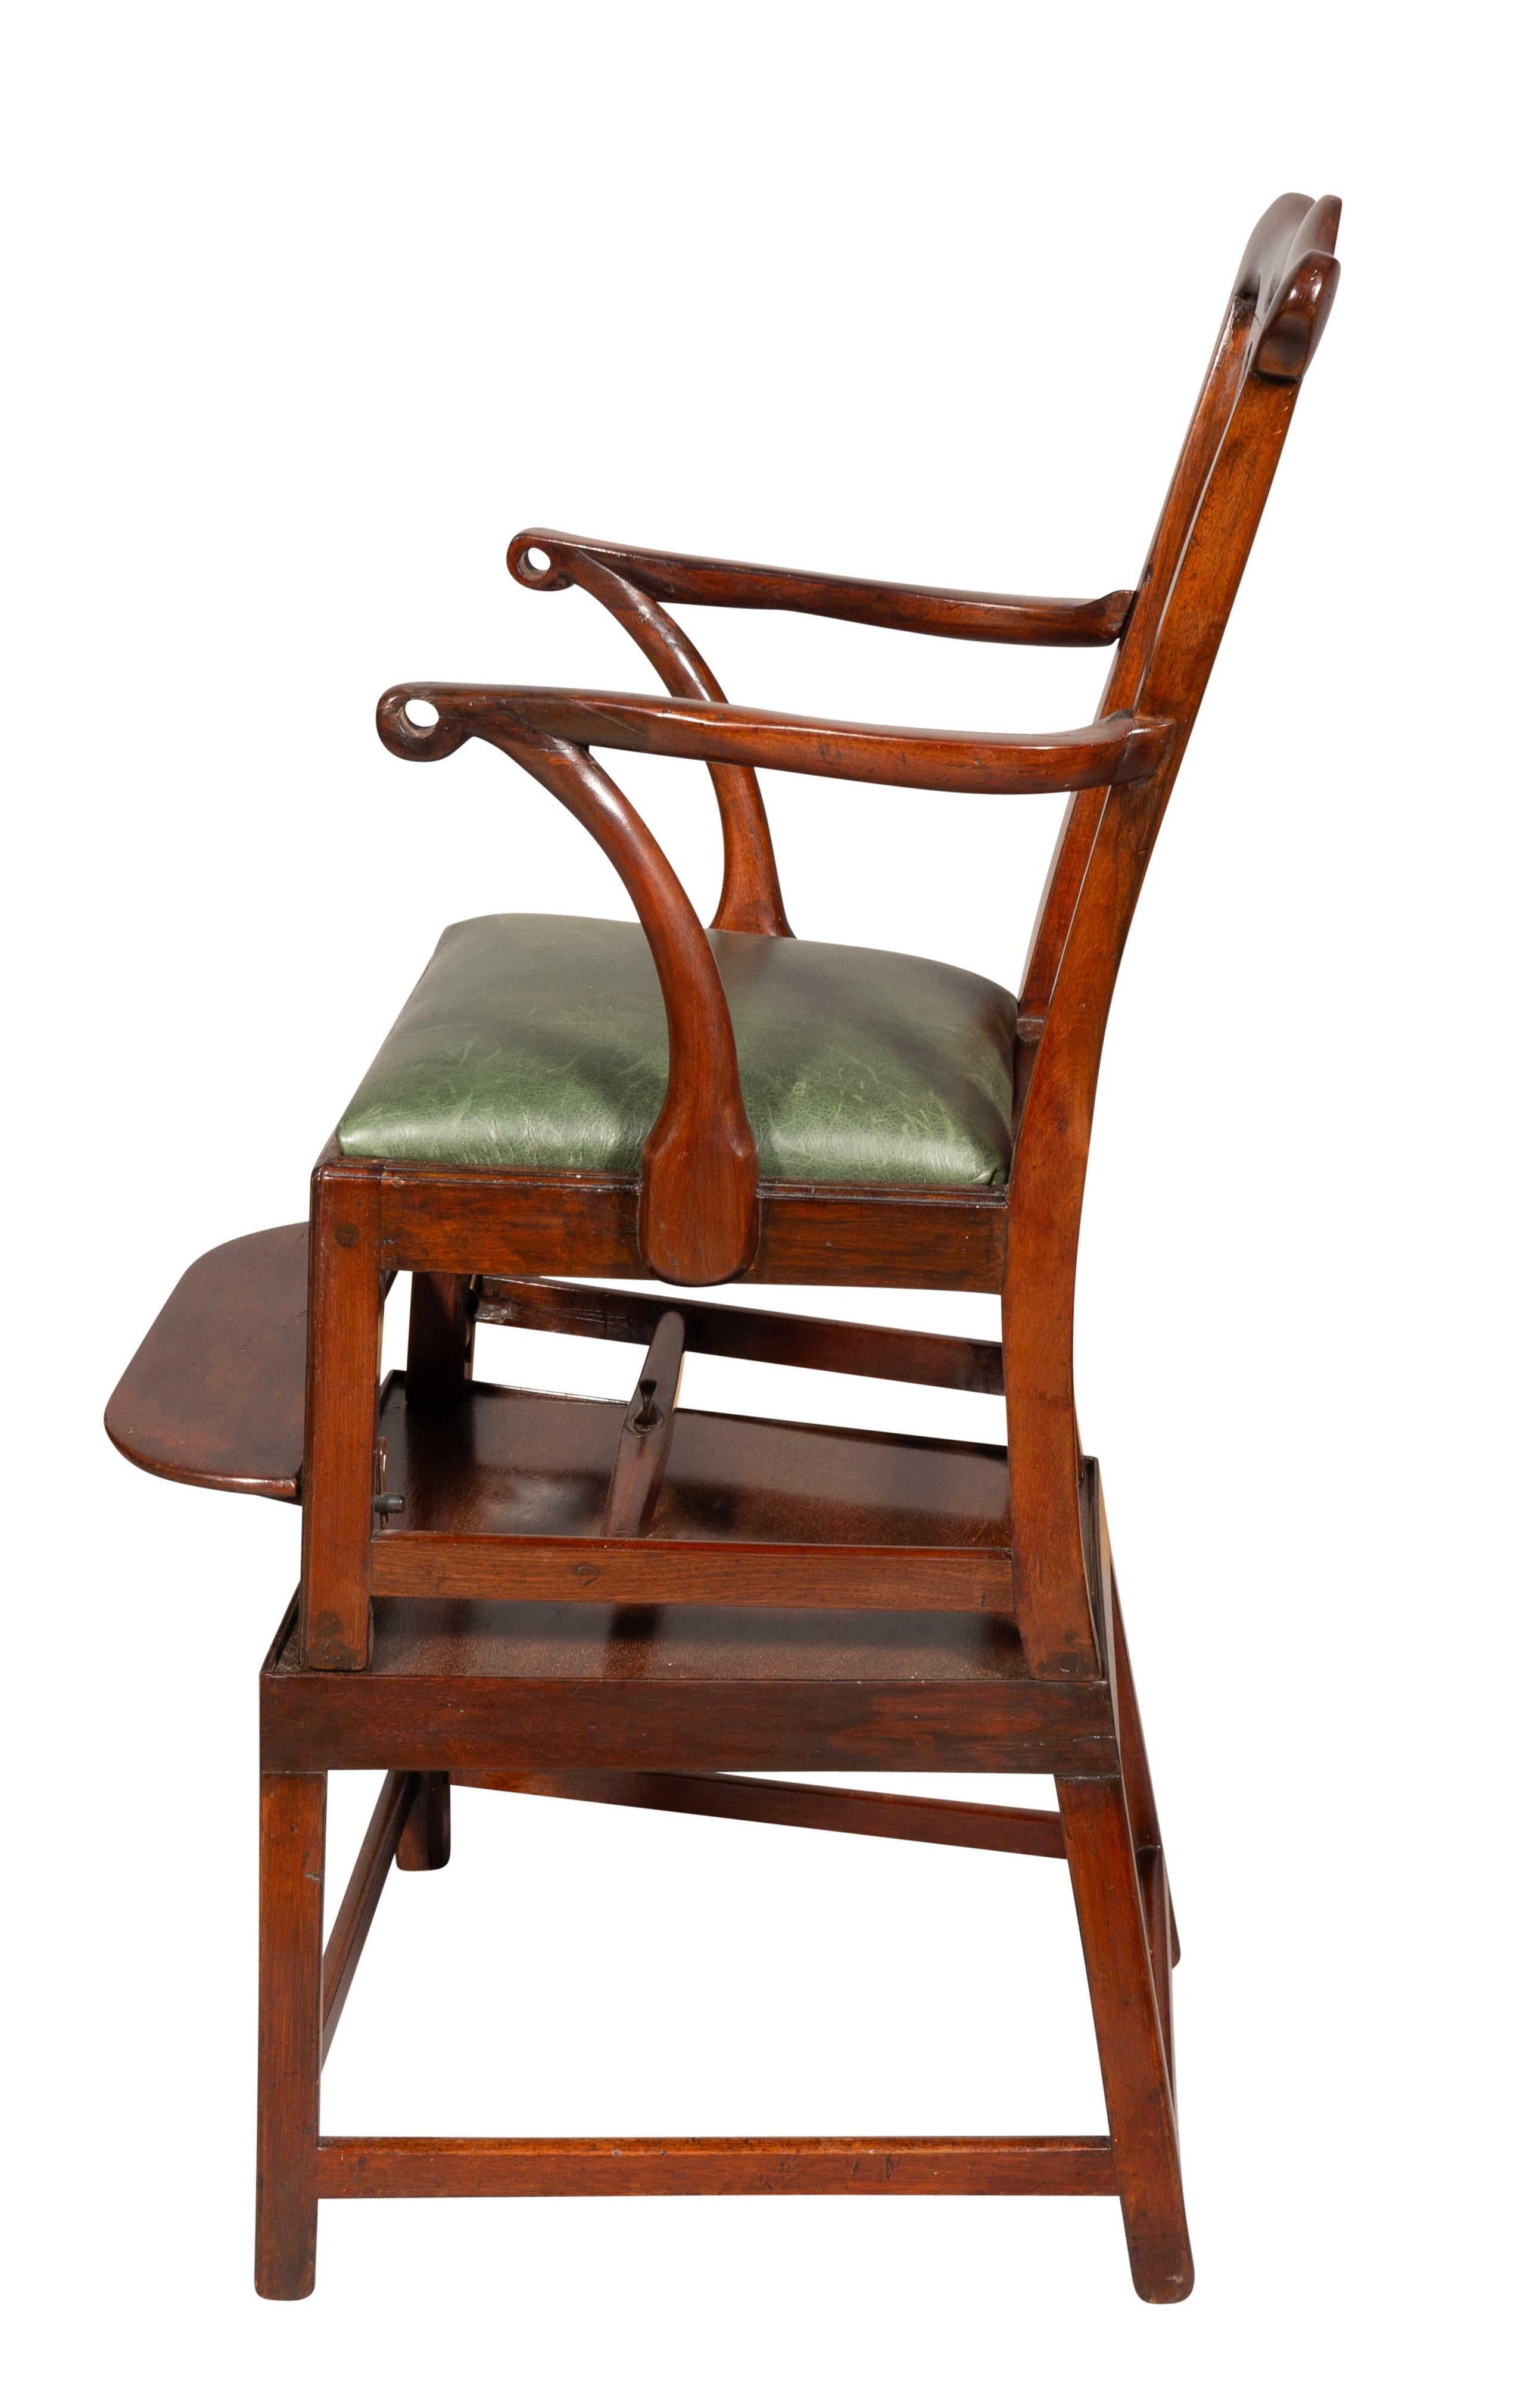 Late 18th Century George III Mahogany Childs High Chair For Sale